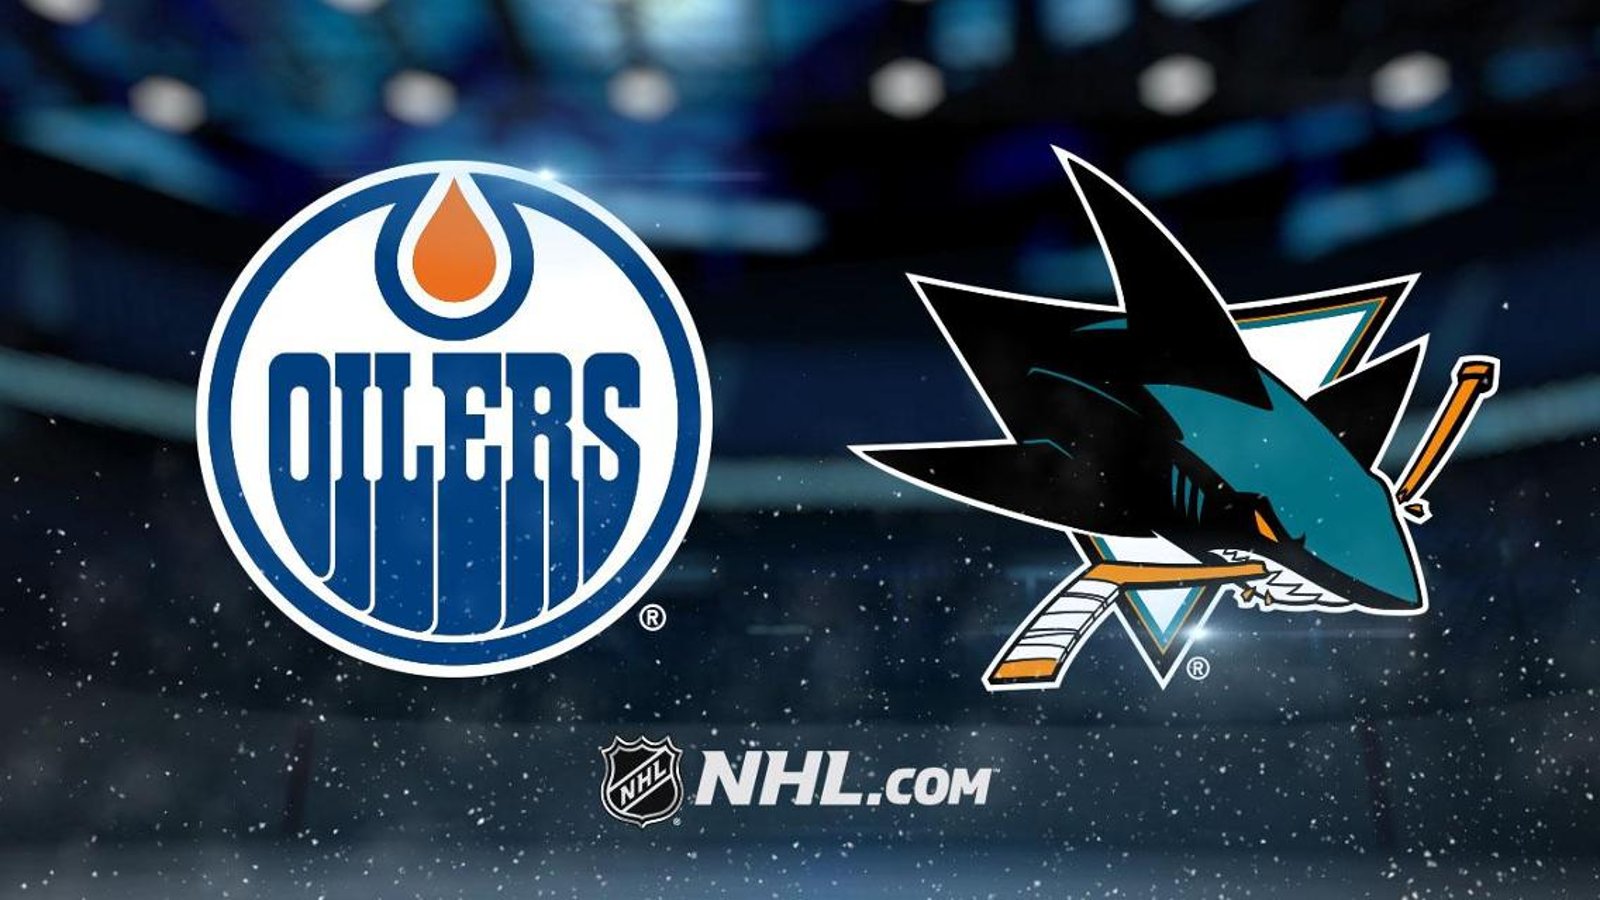 8 players scratched for Oilers vs. Sharks including one very big name.